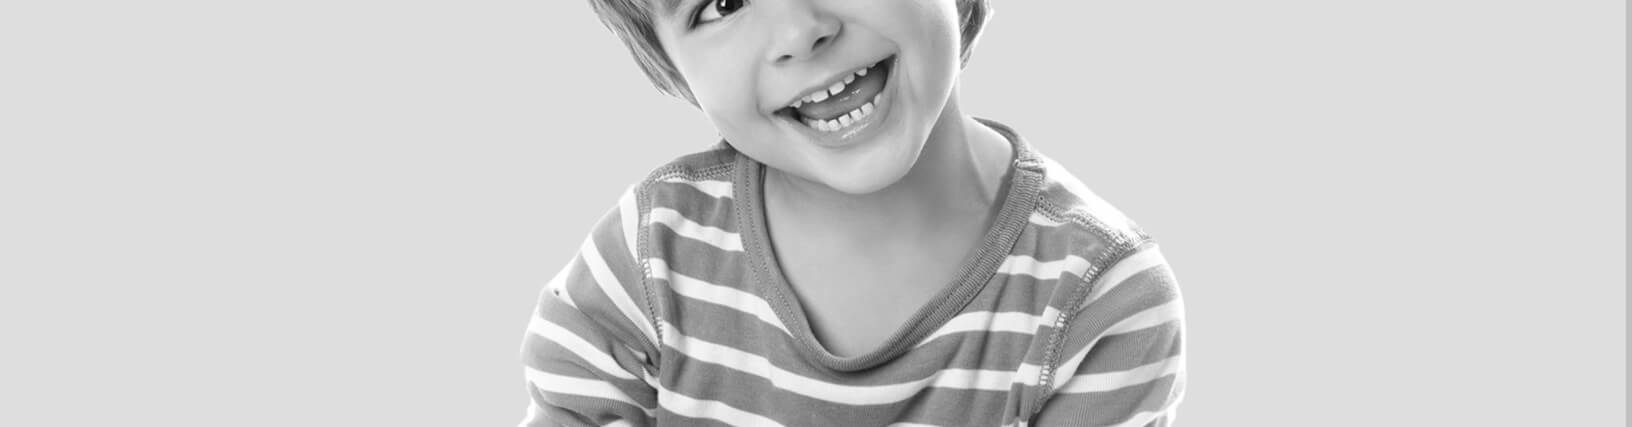 Photograph of Young Boy Smiling in Greyscale